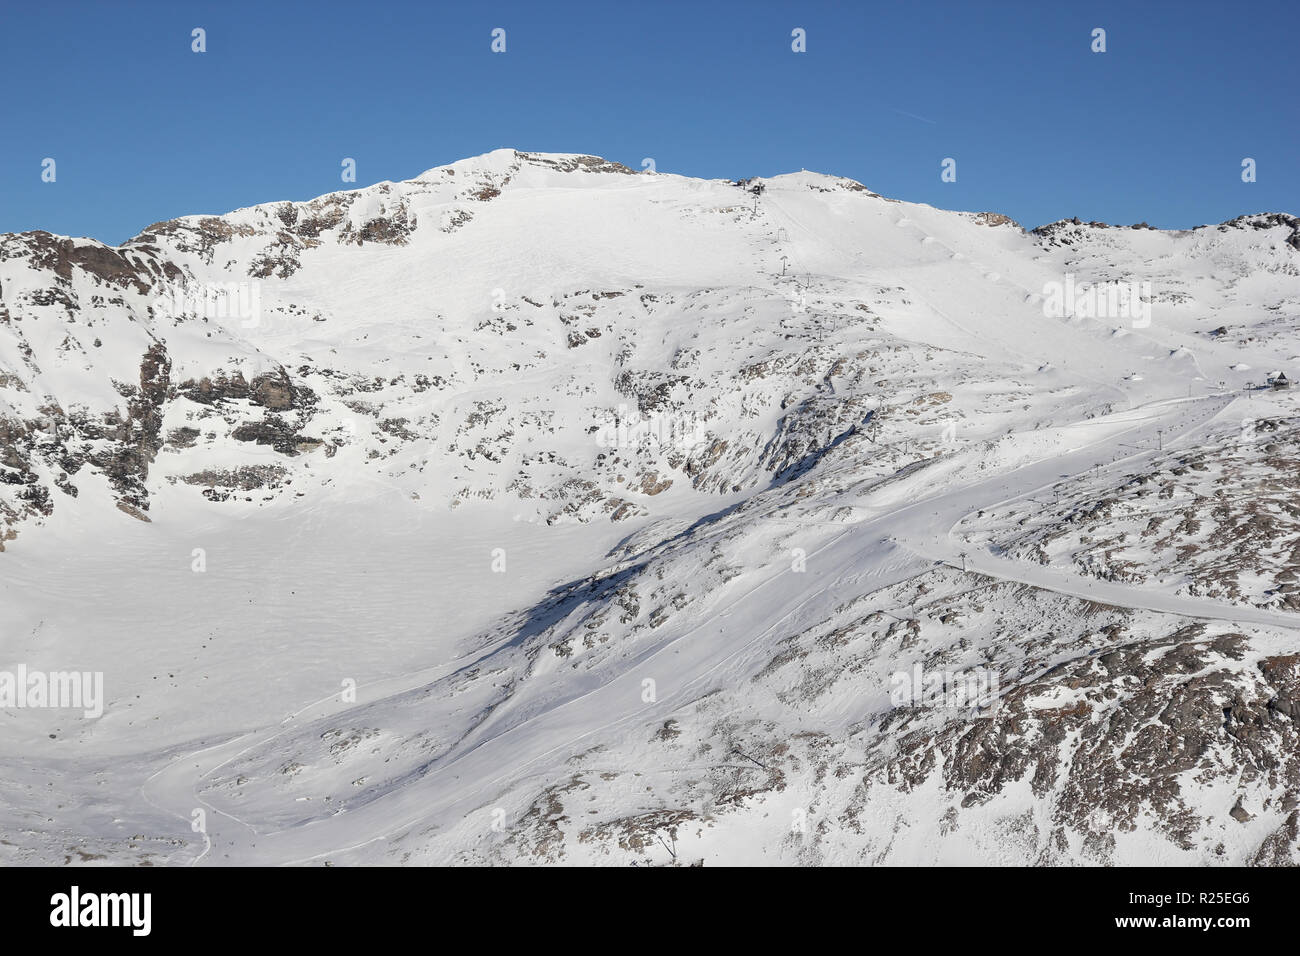 Schareck and Baumbach Spitze mountains in winter, Goldberg mountains, Carinthia, Alpe Adria Trail, Austria, central Europe Stock Photo